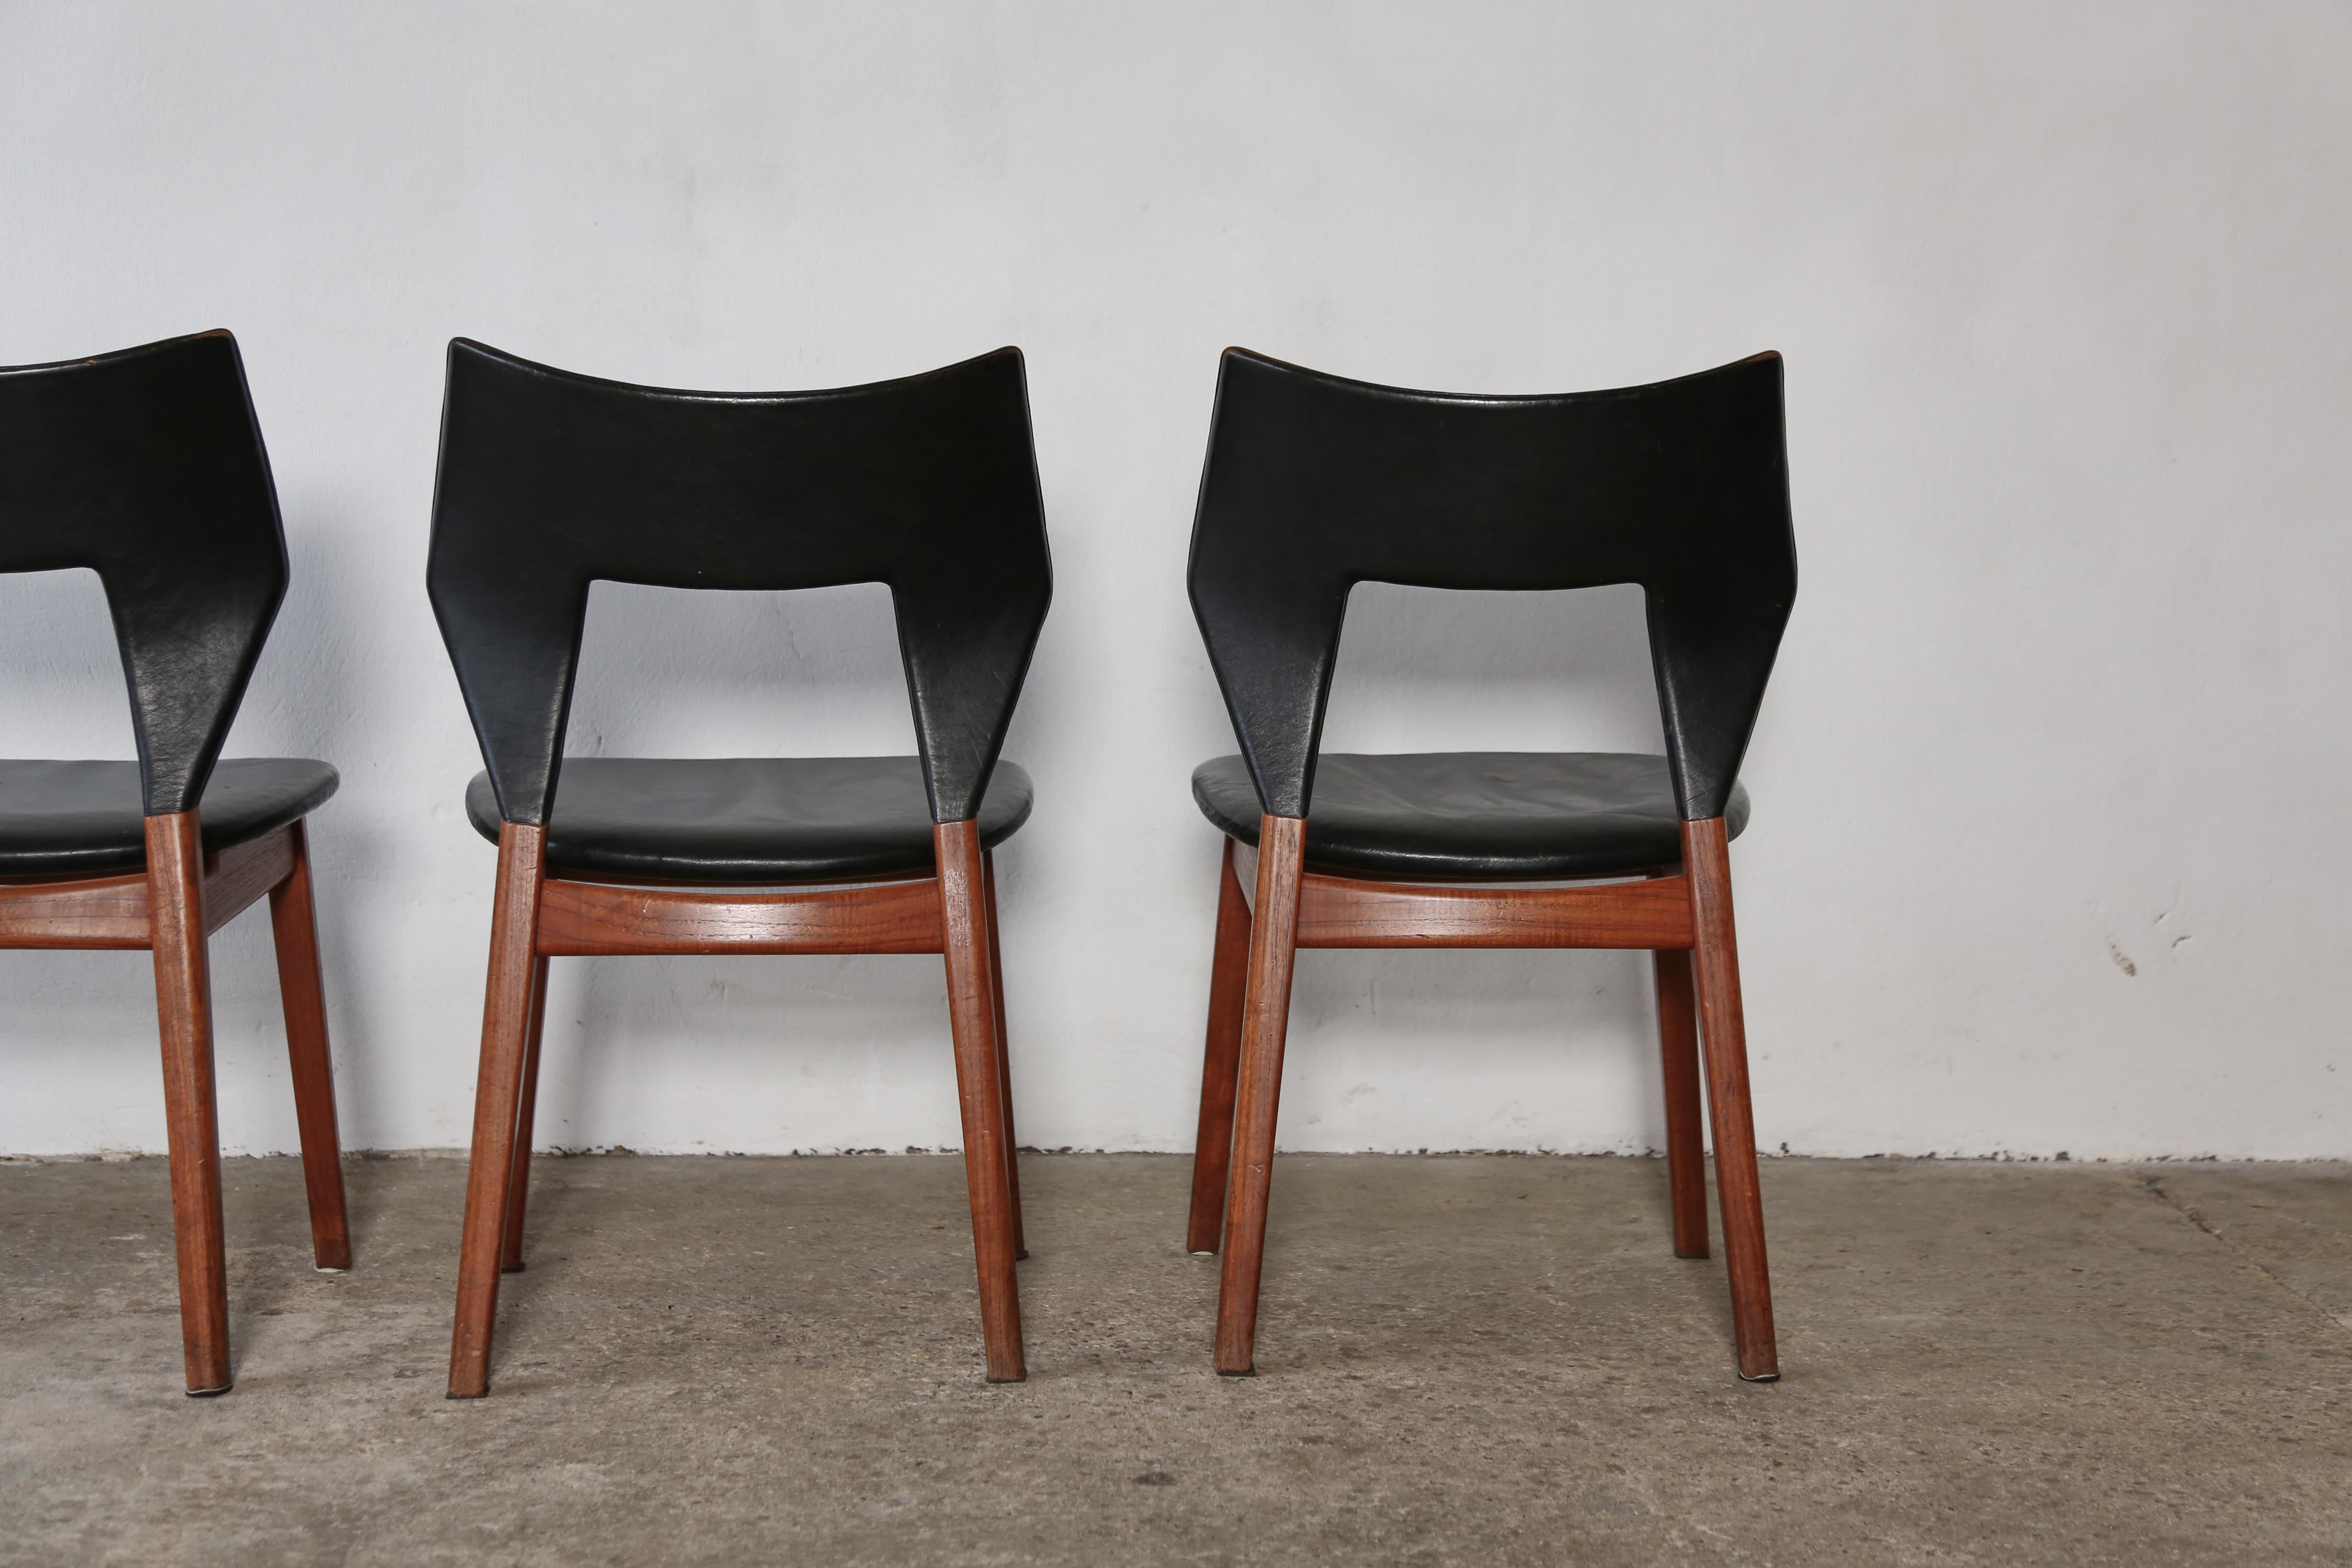 Edvard and Tove Kindt-Larsen Dining Chairs, Thorald Madsens, Denmark, 1950s For Sale 5